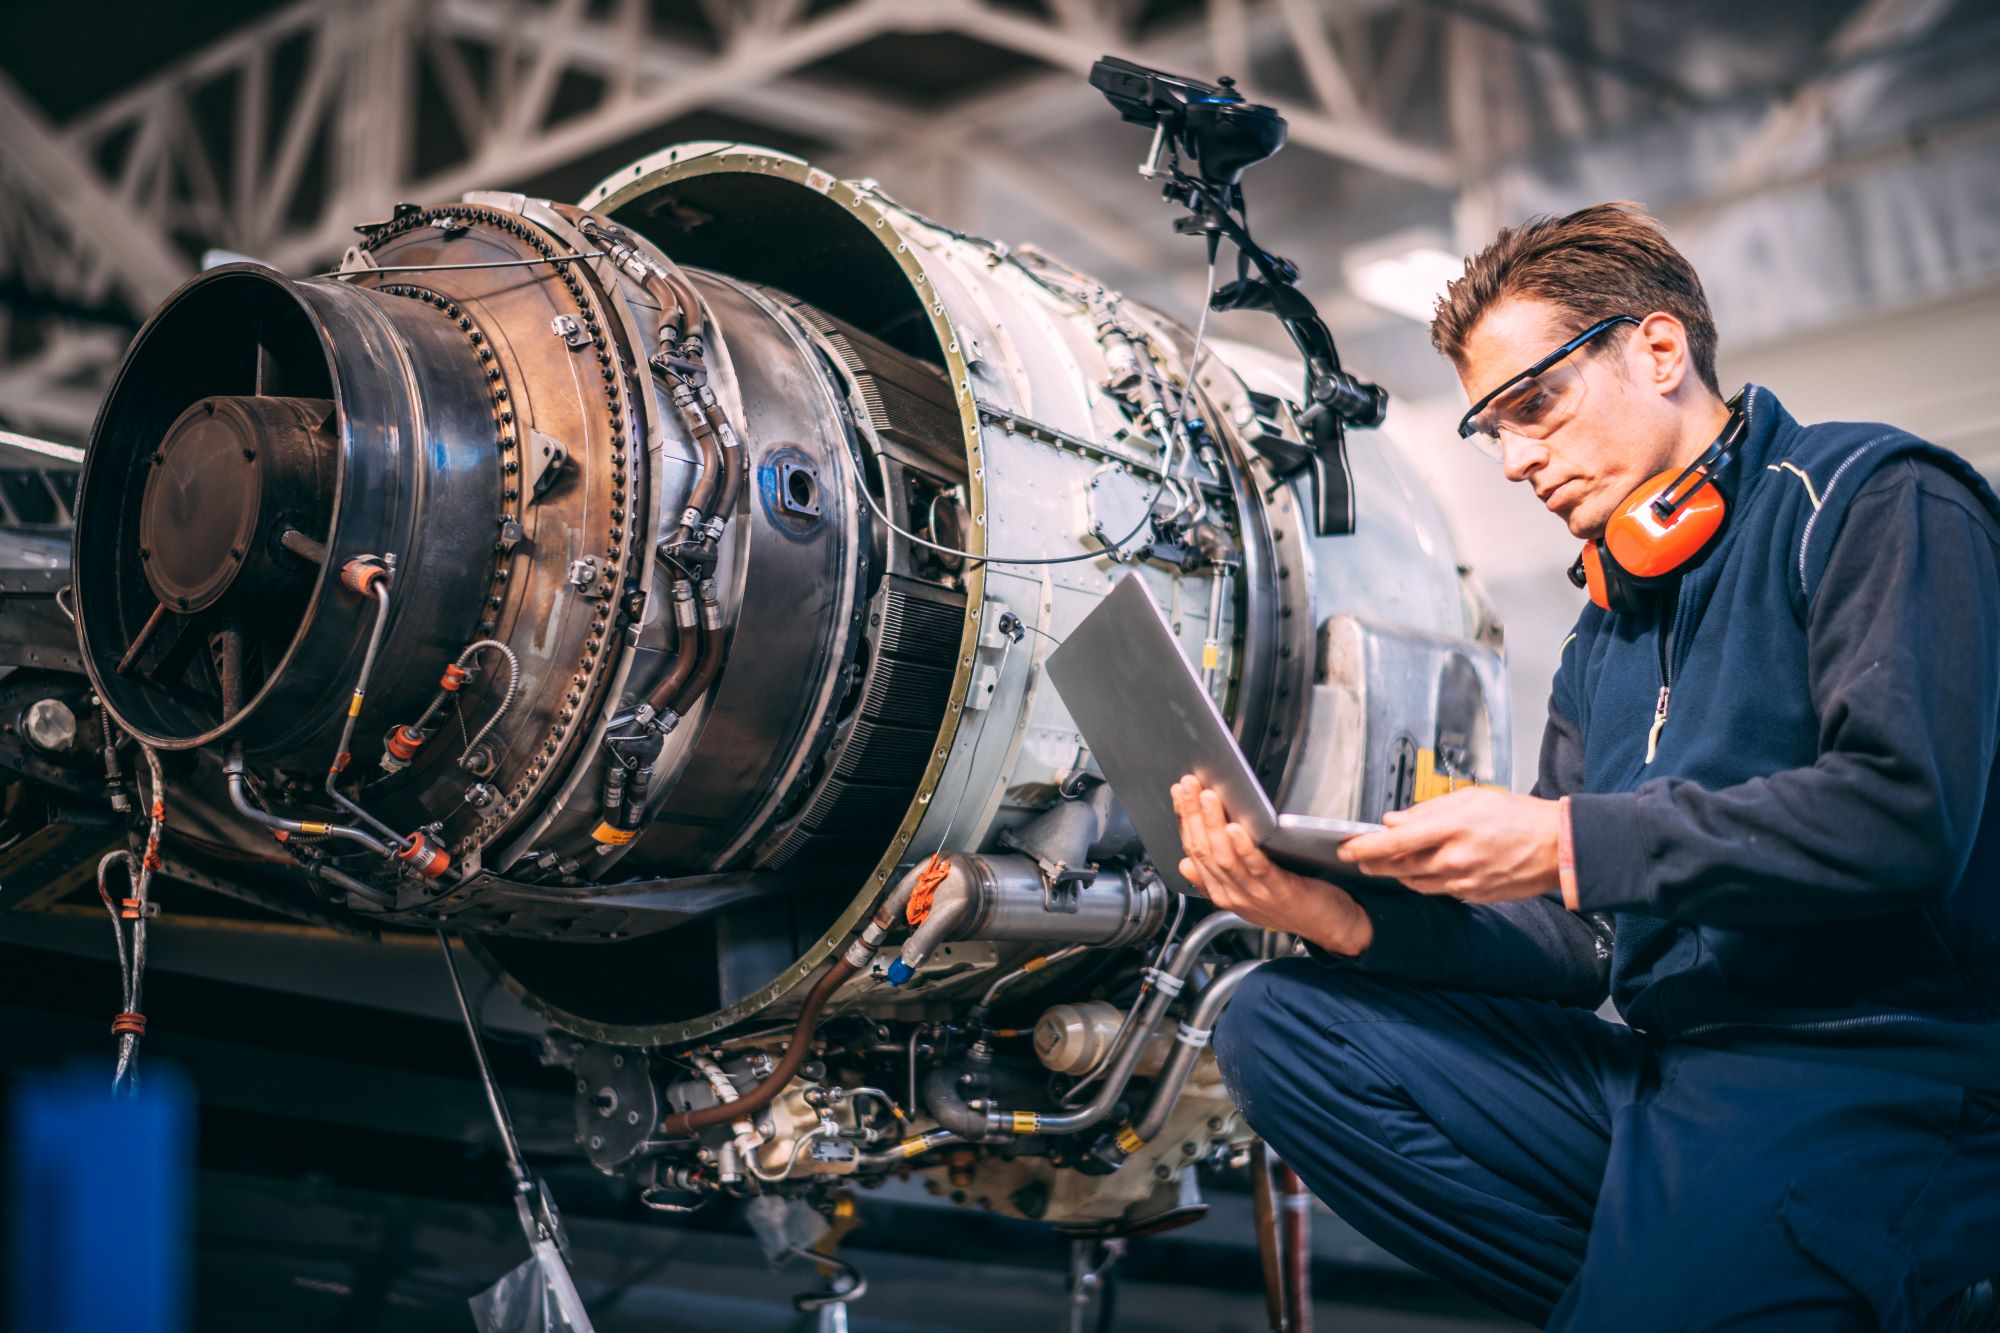 An aerospace engineering working on a laptop next to an aircraft engine.